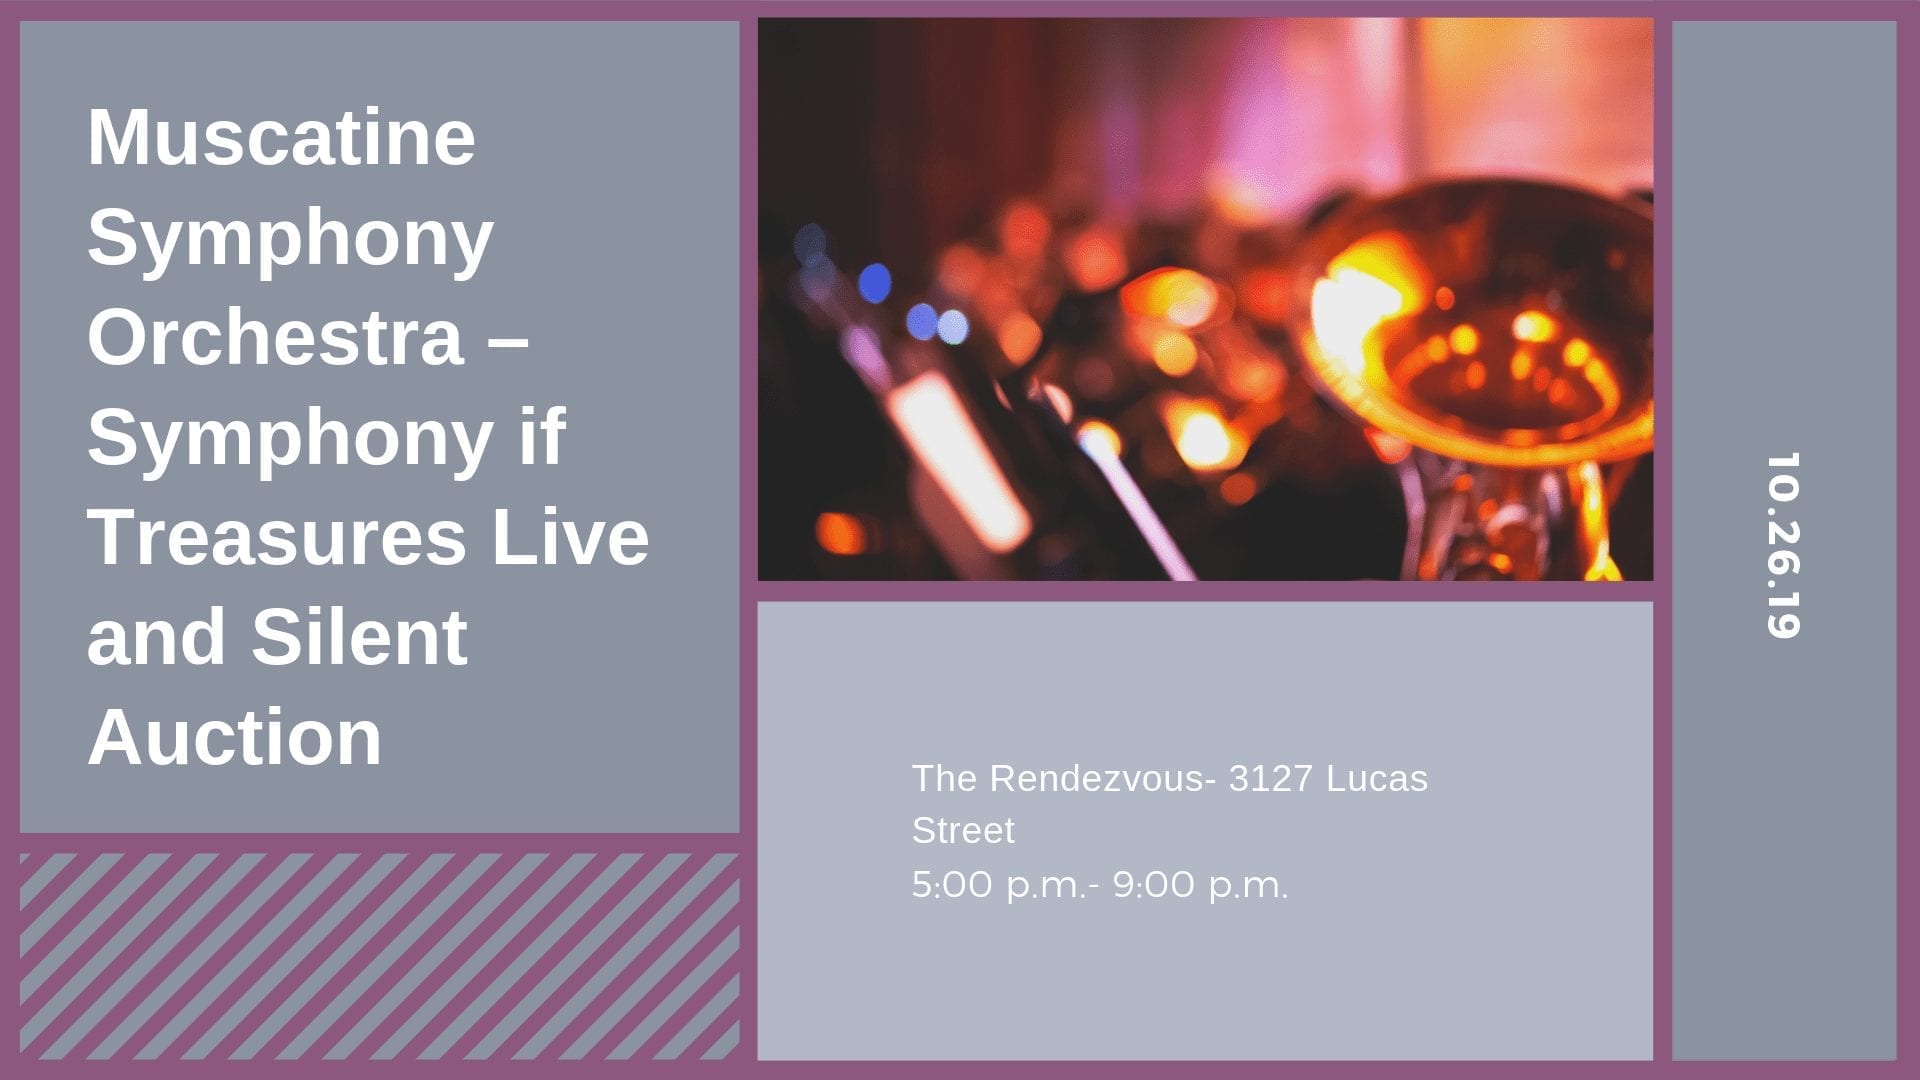 Muscatine Symphony Orchestra – Symphony if Treasures Live and Silent Auction